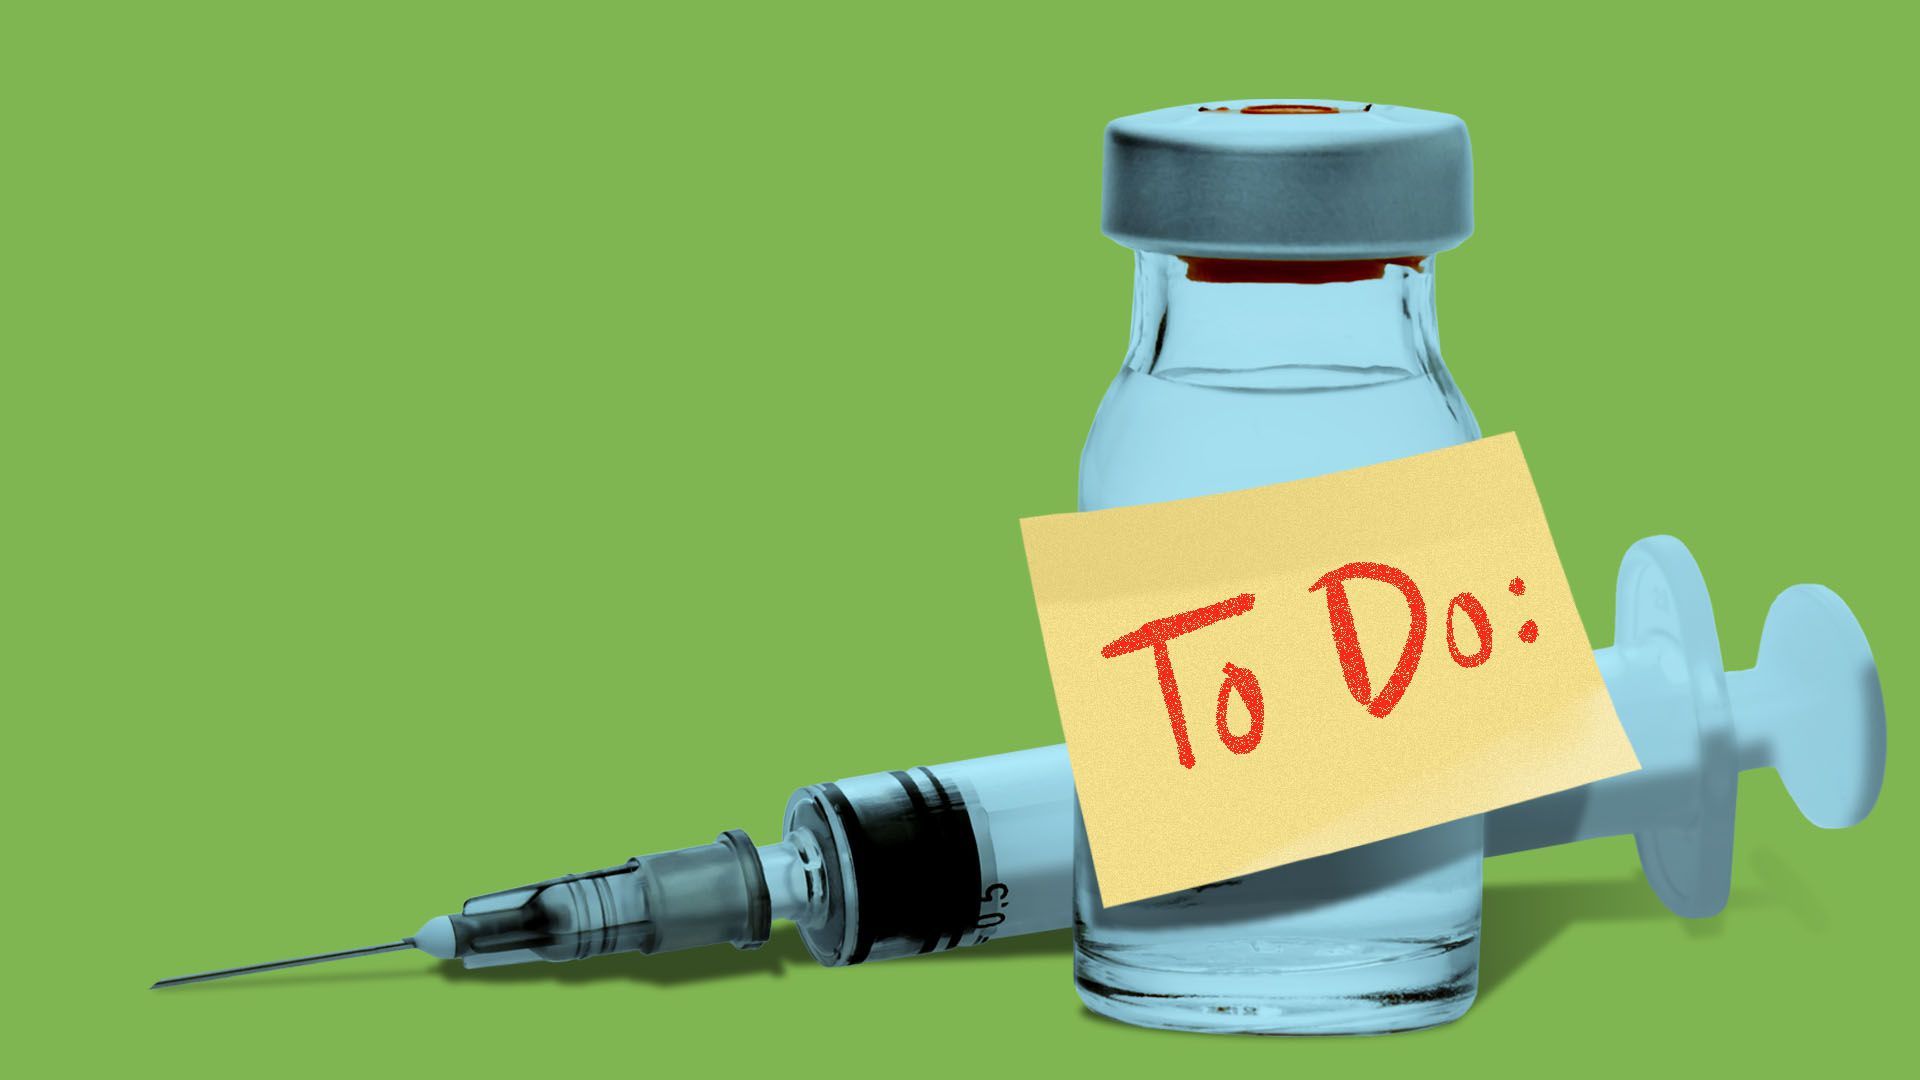 Illustration of a syringe and glass medicine bottle with a post-it note attached that says 